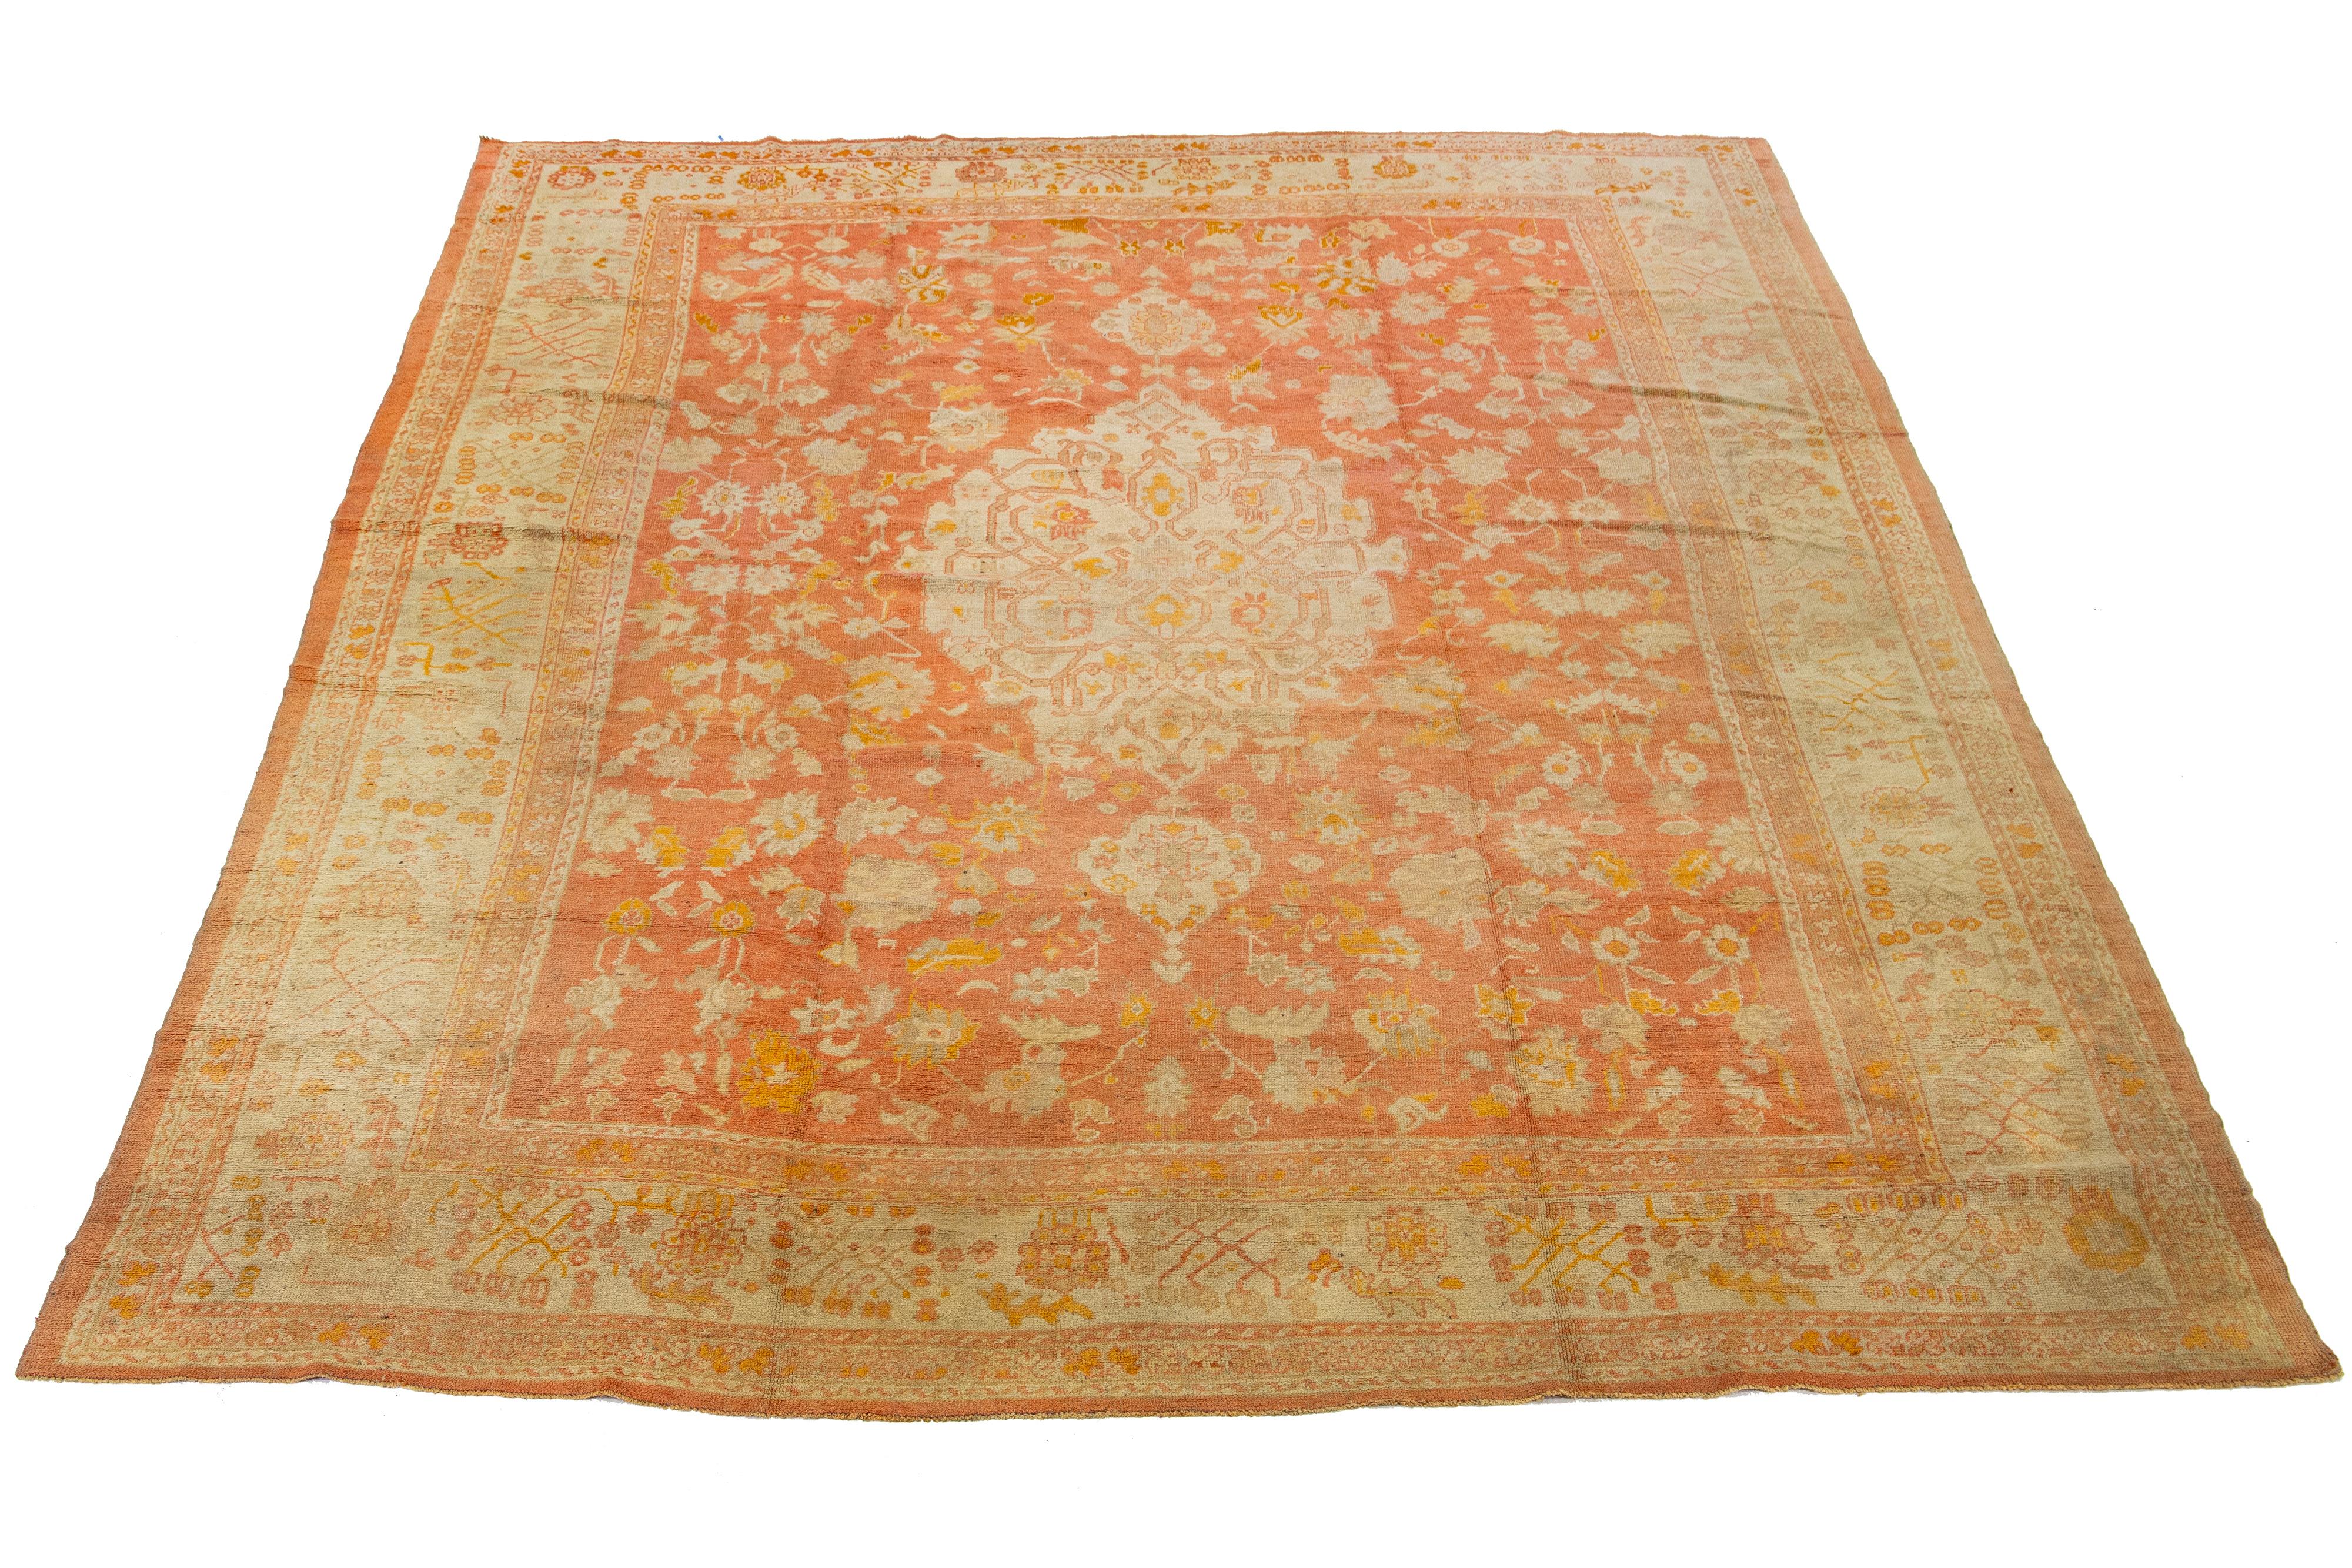 Beautiful antique Turkish Oushak hand-knotted wool rug with a light orange field and an ivory border showcasing a floral medallion motif design.

This rug measures 13'5' x 17'4